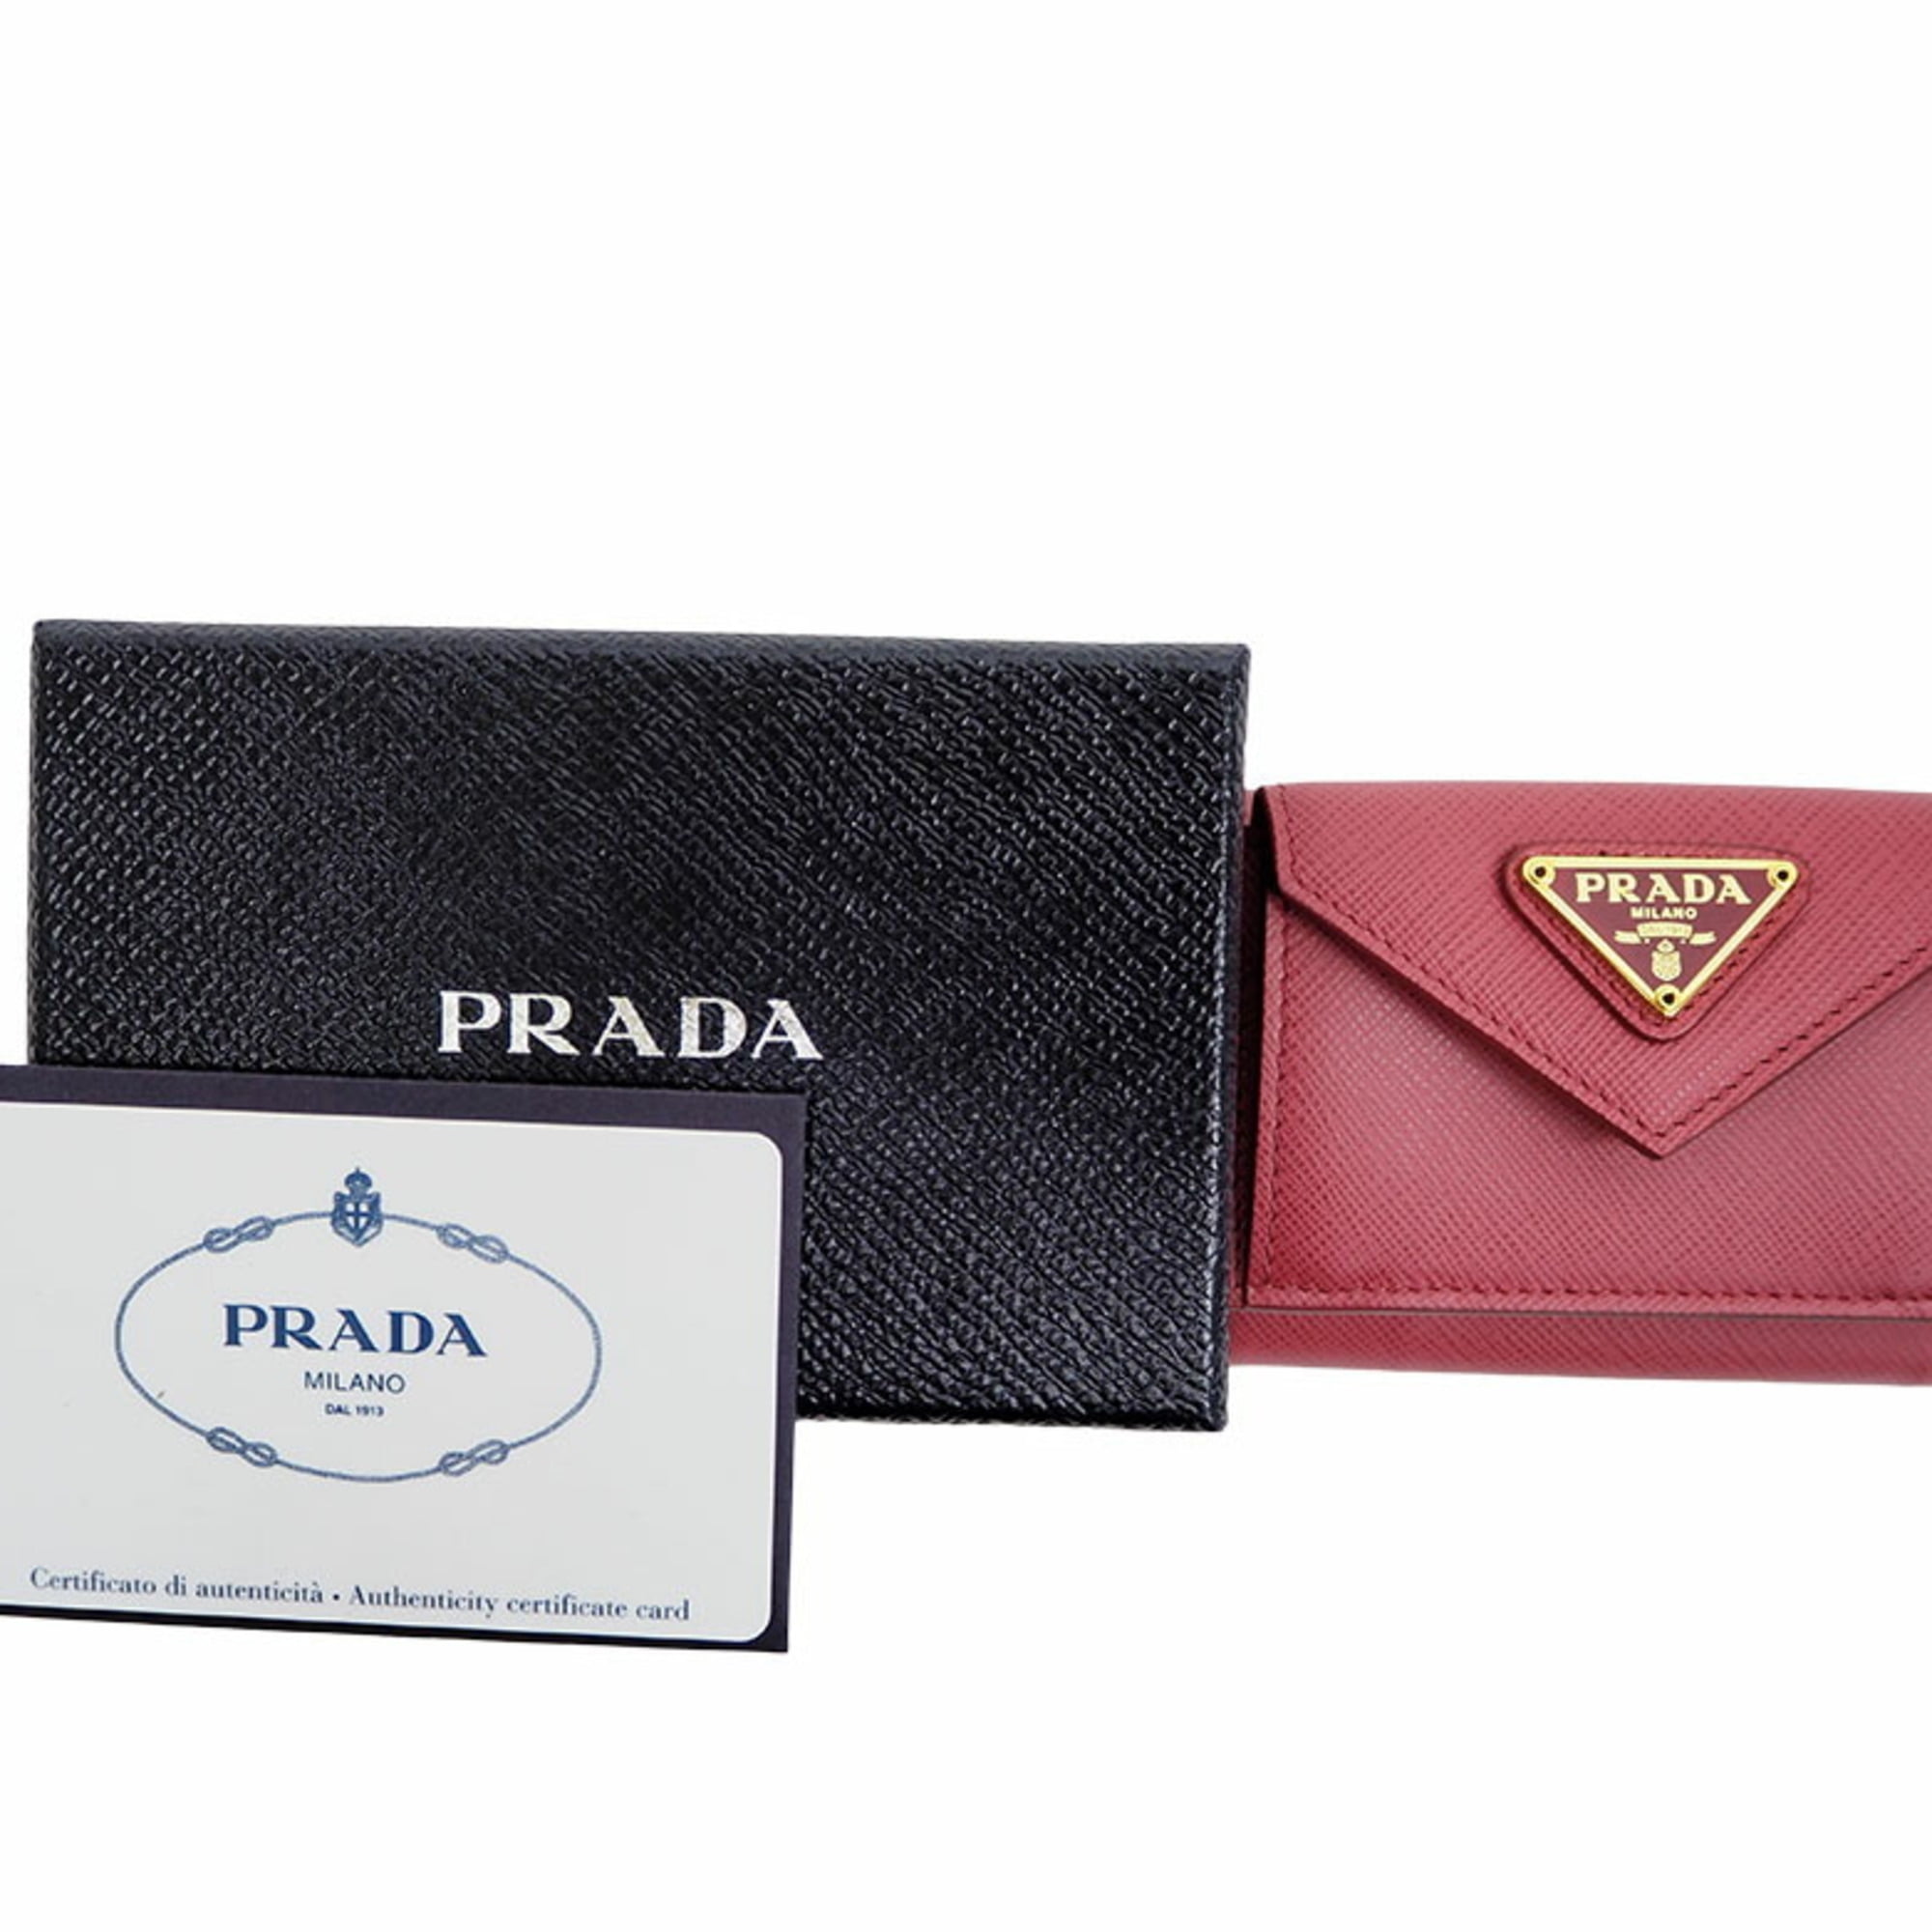 Prada Bifold Compact Wallet Purse in Apple Green Ostrich Leather